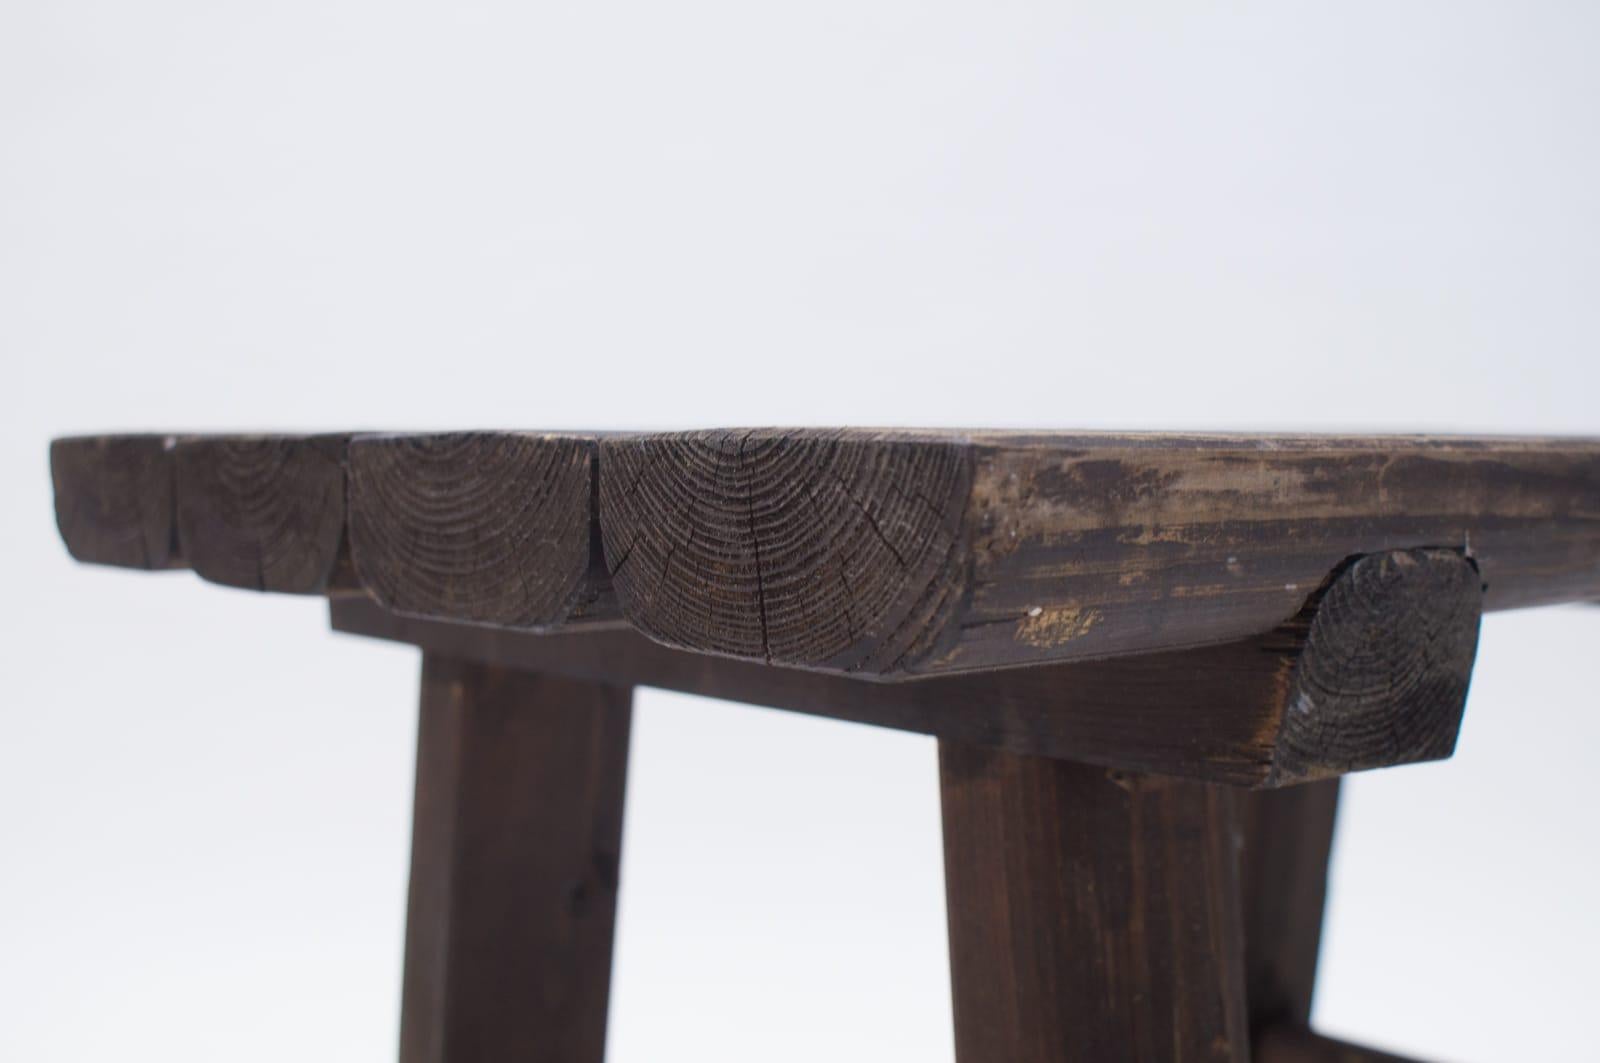 Black Forest Wooden Bench, 1930s-1940s Germany 6